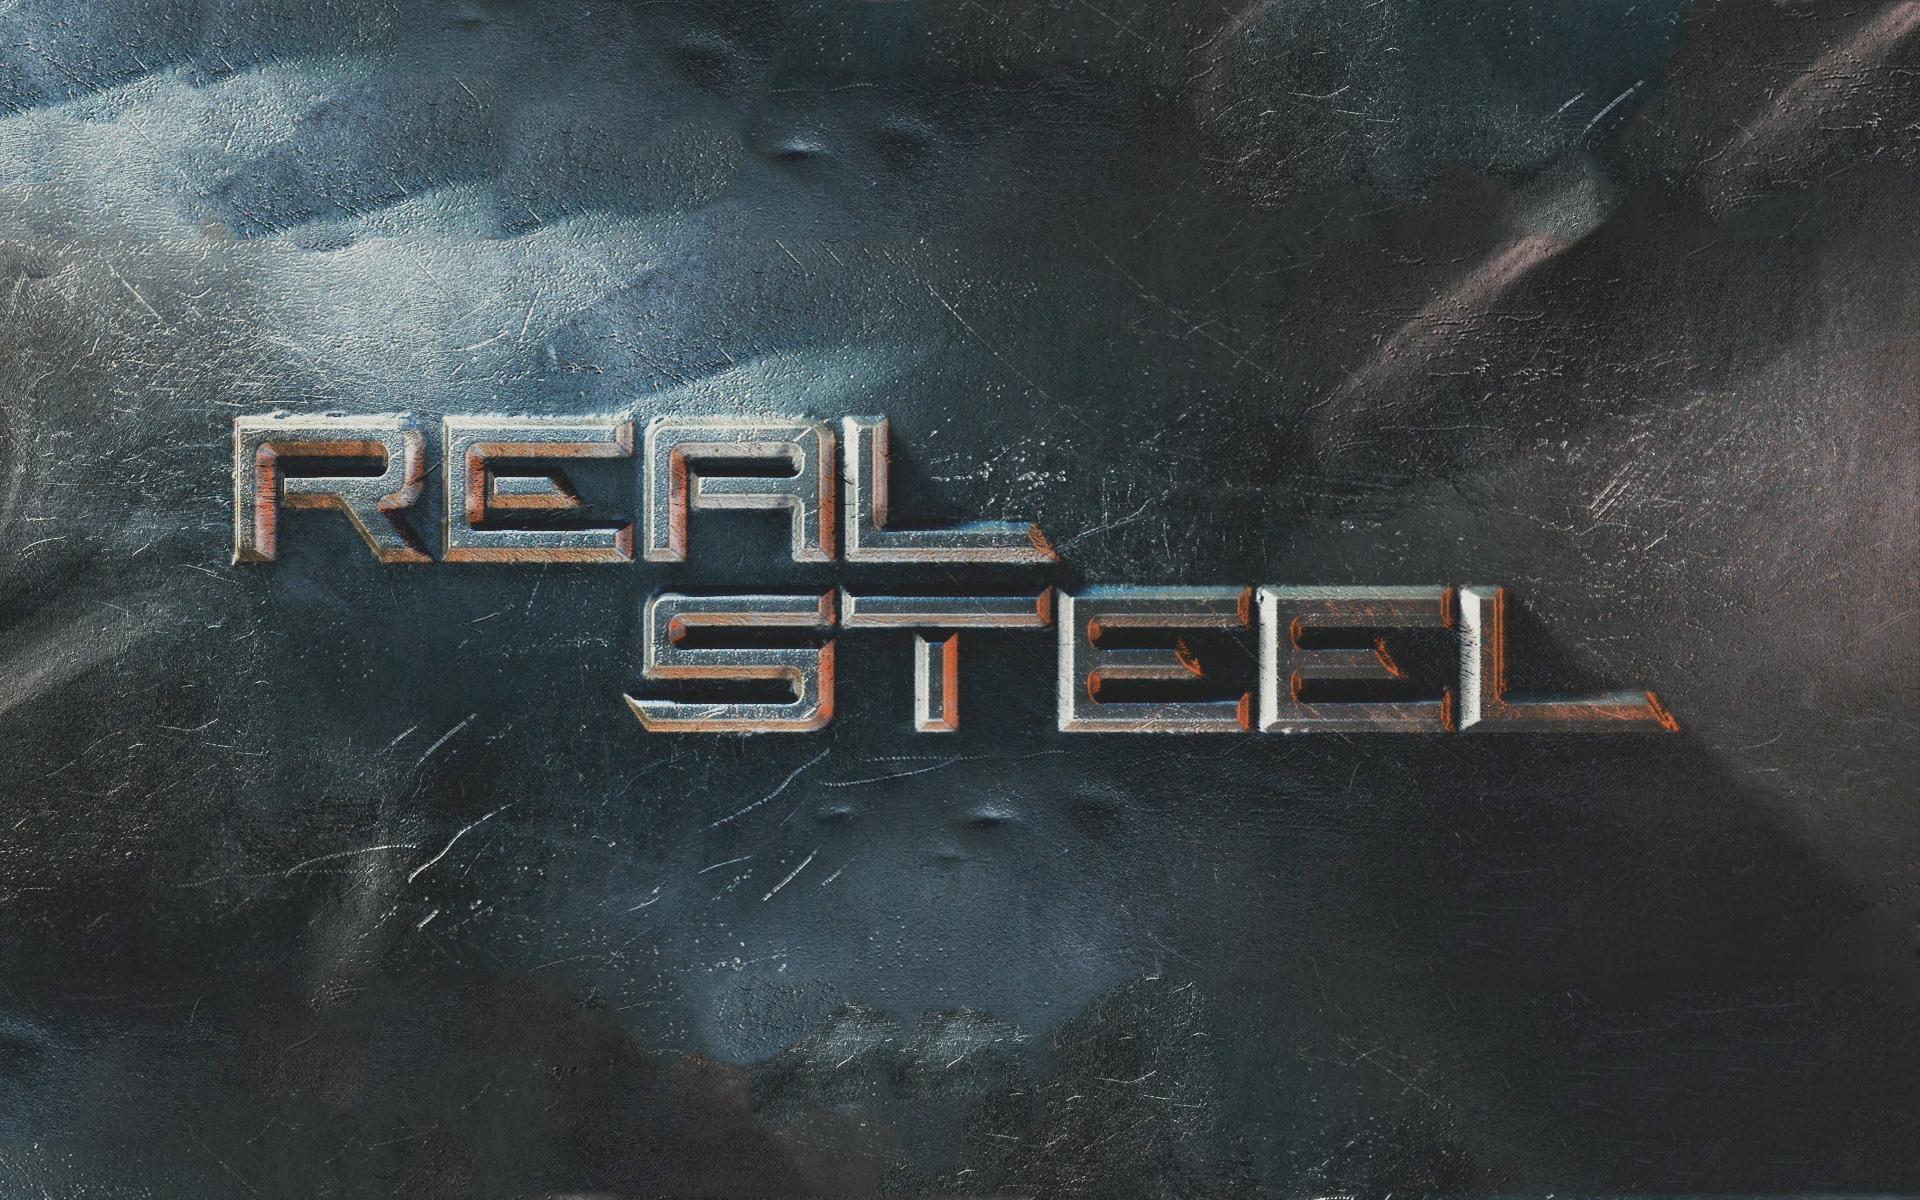 real steel wallpaper hd,text,font,logo,graphics,vehicle